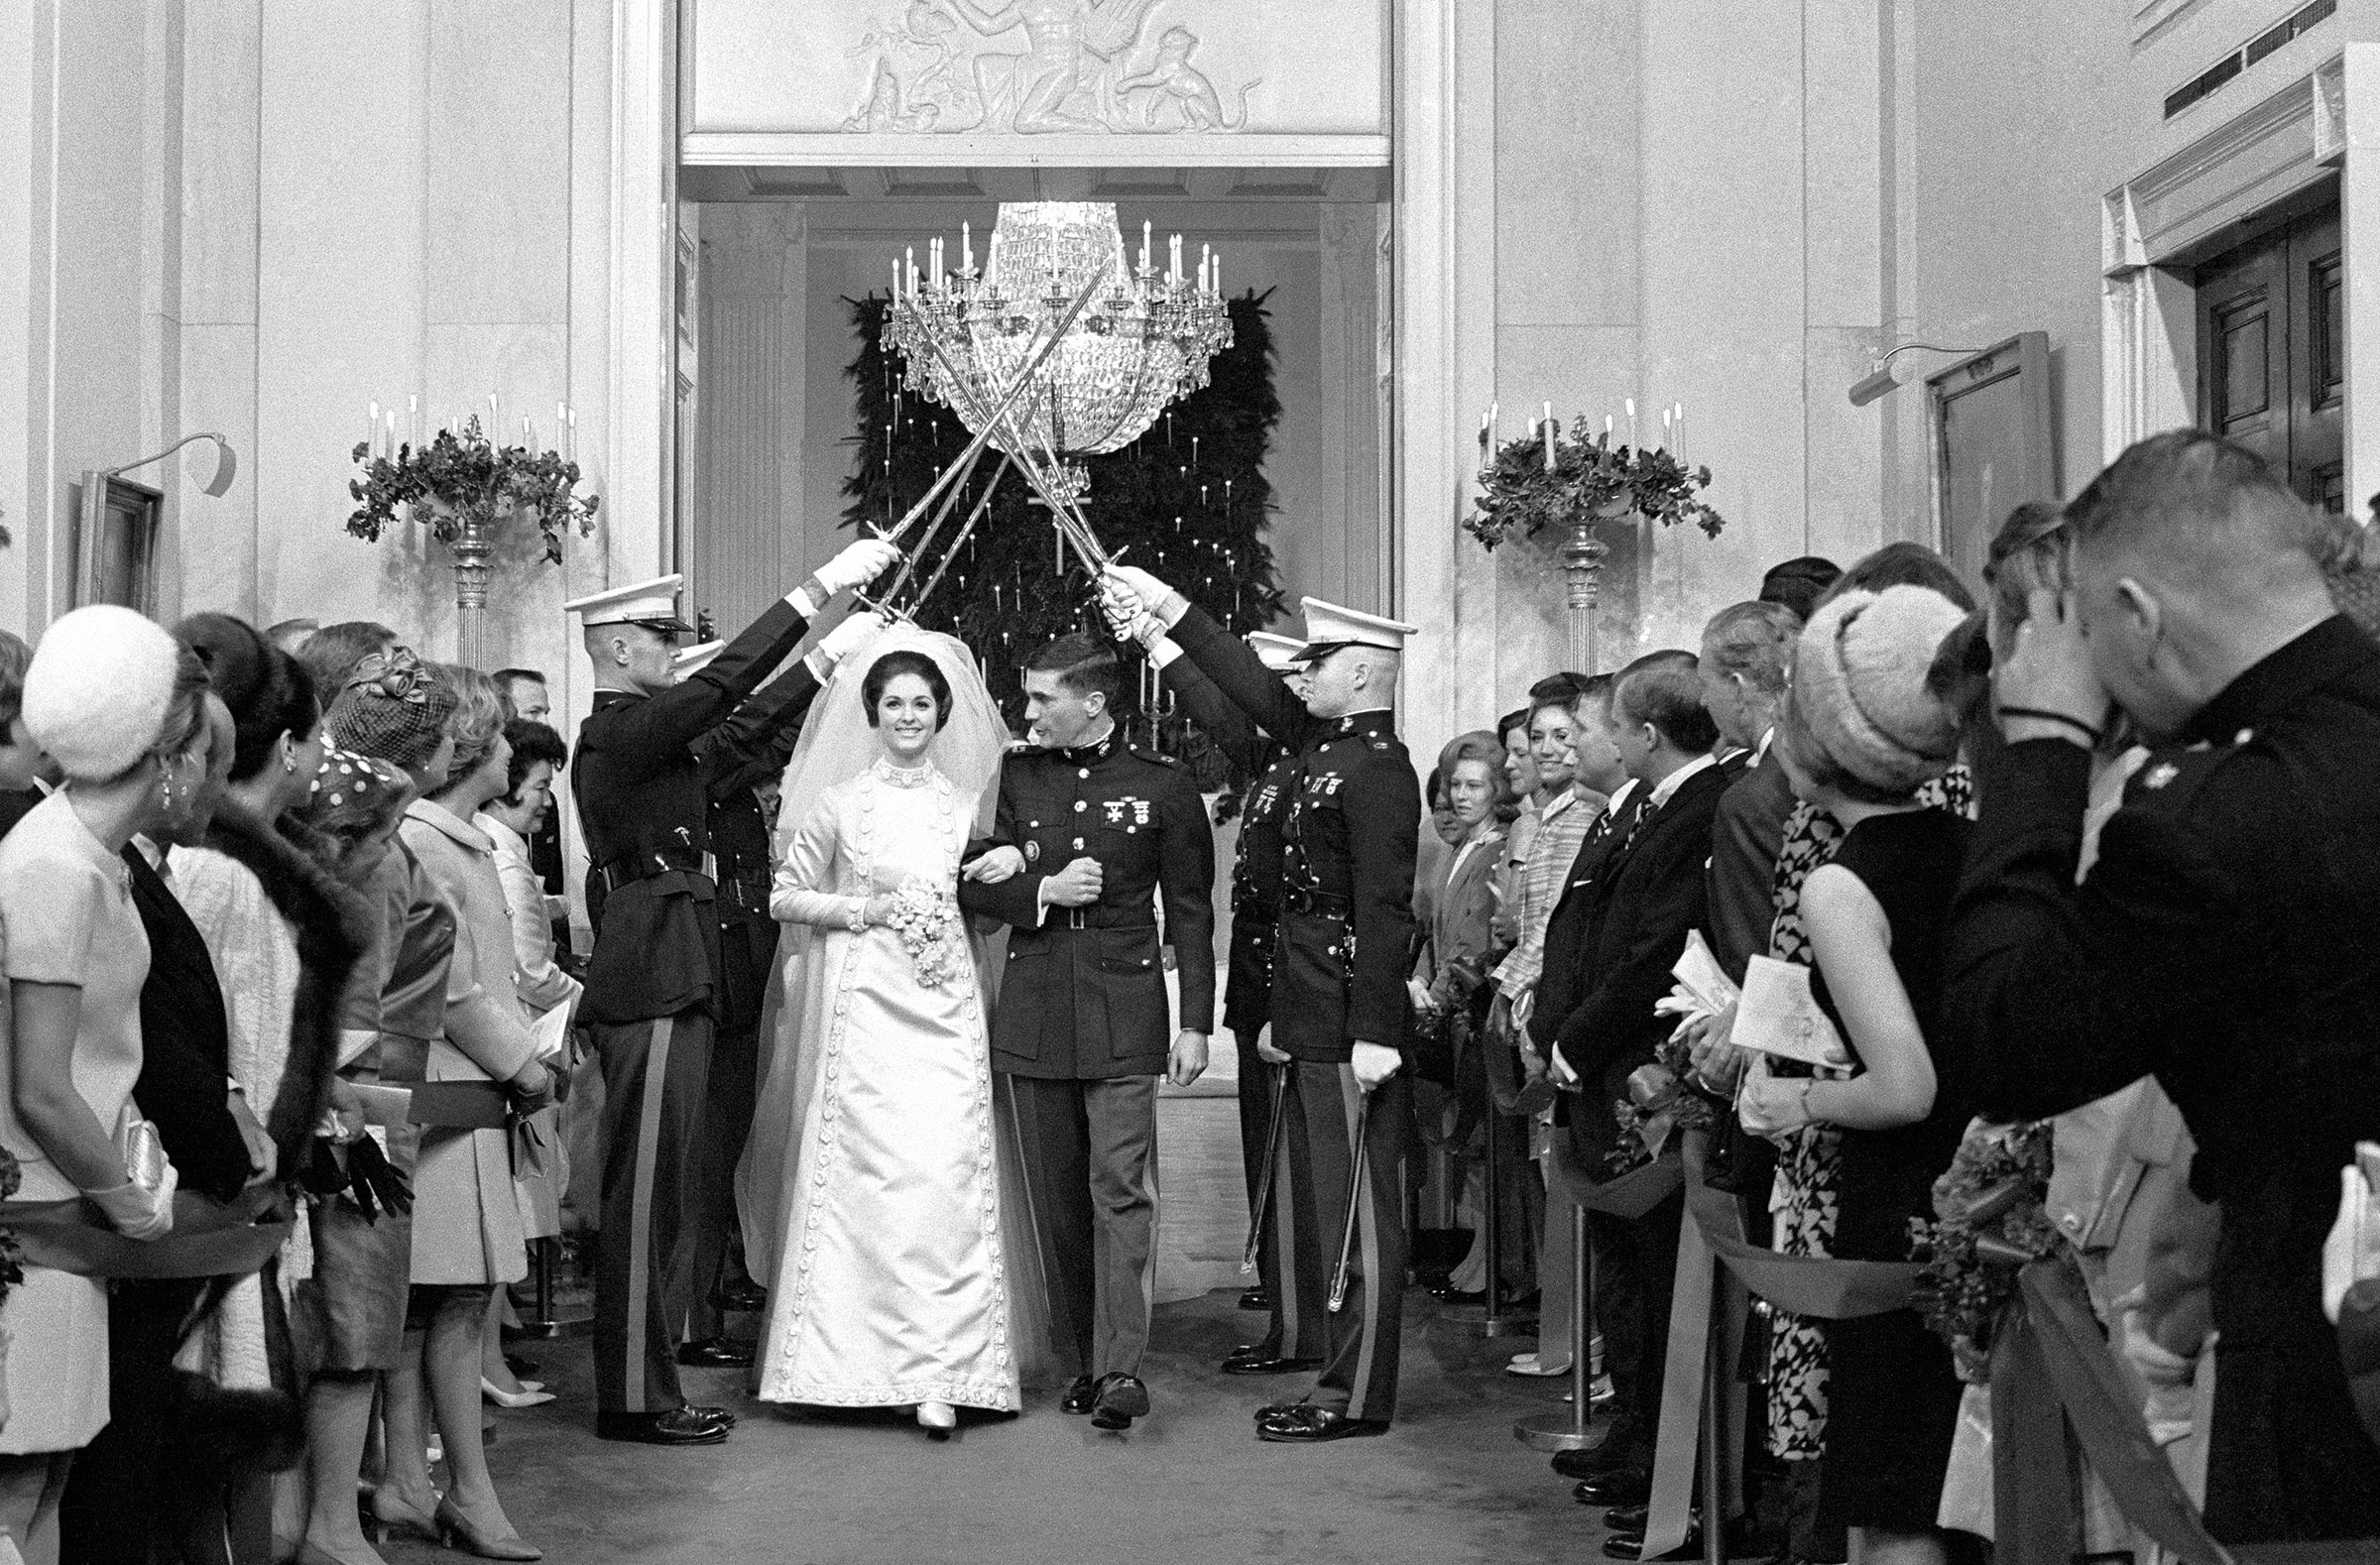 Charles Robb and Lynda Johnson, daughter of President Lyndon B. Johnson, walk through an arch of drawn swords as they leave the East Room of the White House following their wedding ceremony, Dec. 9, 1967. (Bettmann Archive/Getty Images)